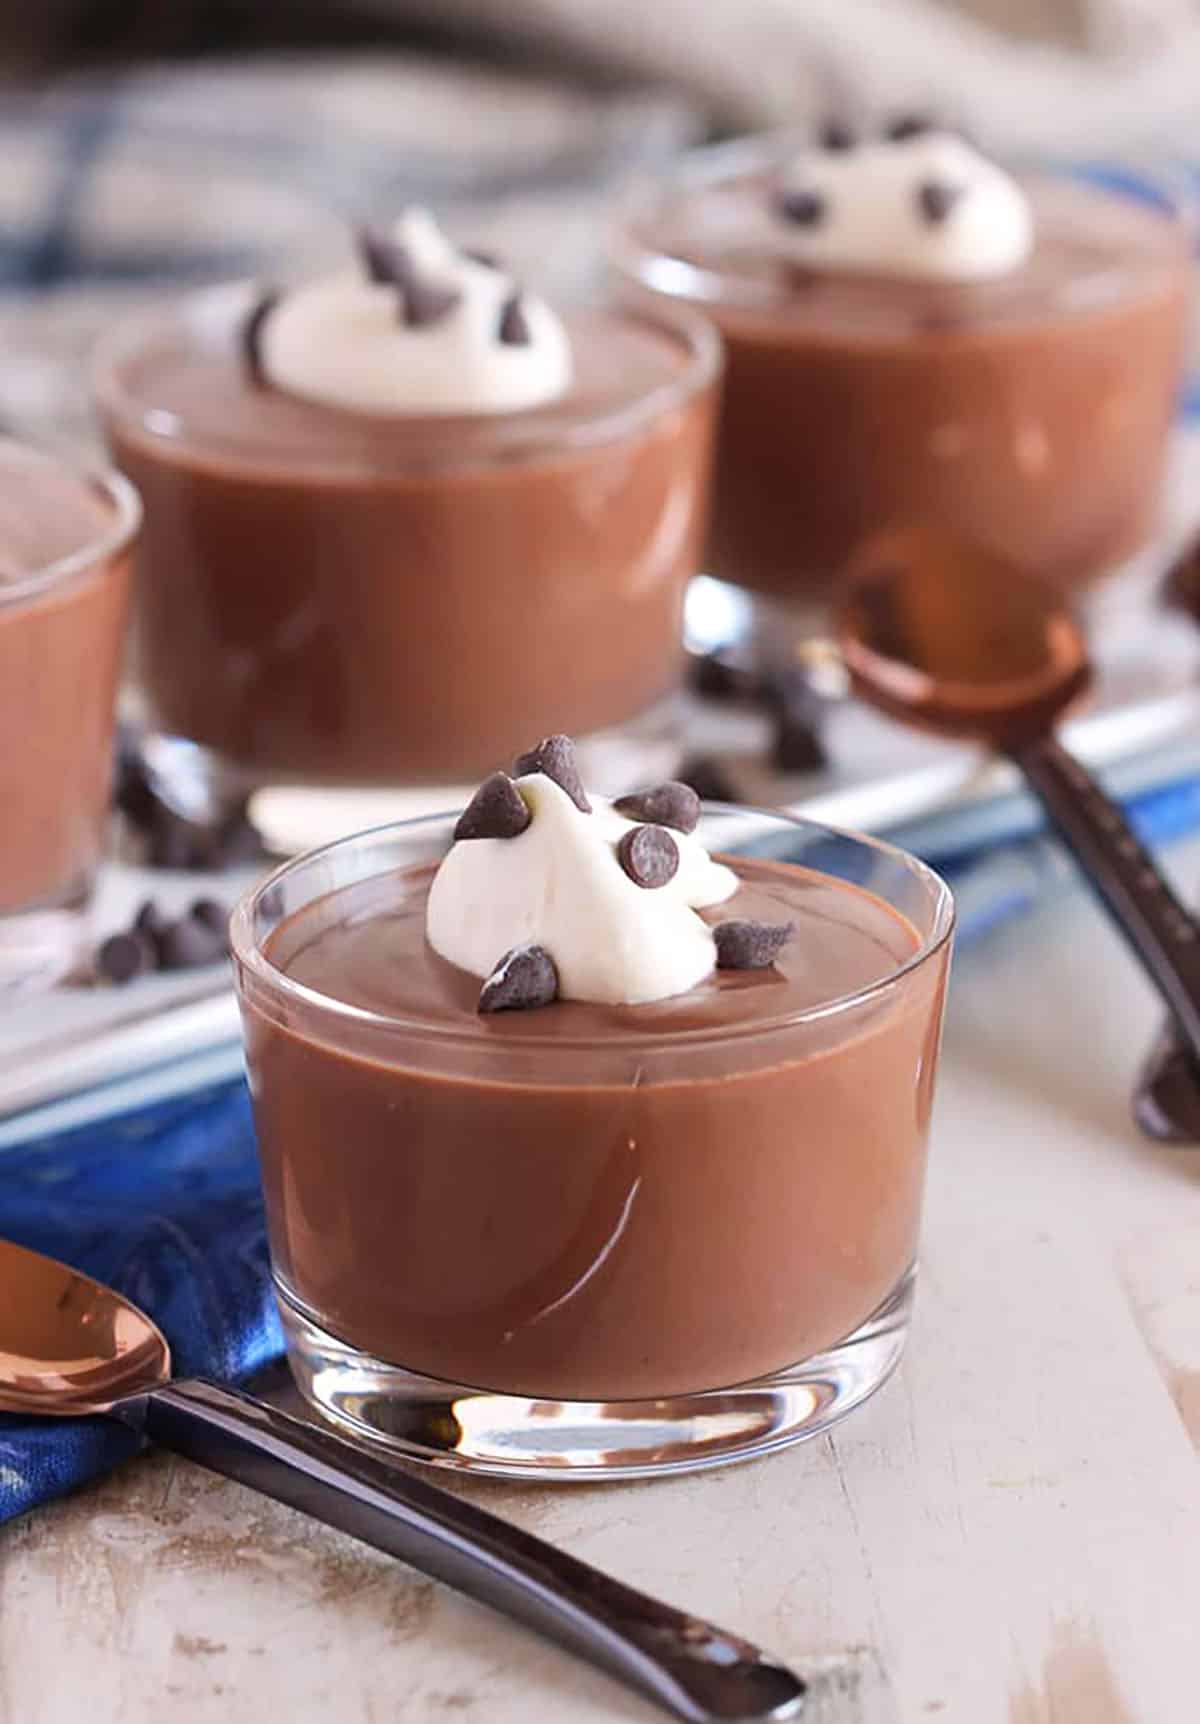 Chocolate pudding in a glass dish with whipped cream and chocolate chips with more dishes on a white platter in the background.